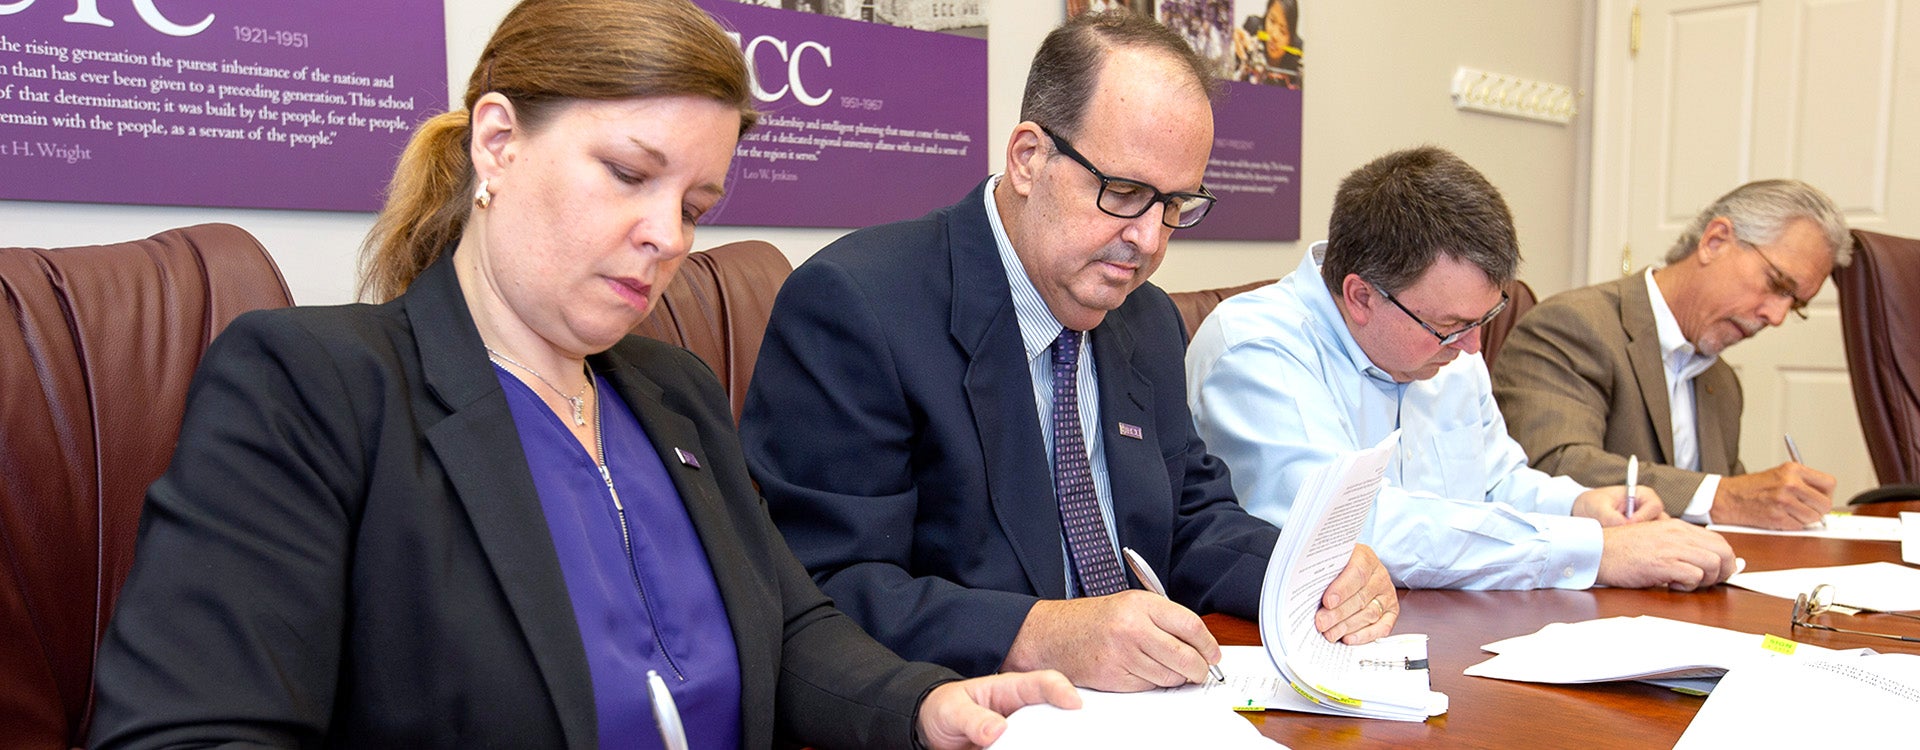 Vice Chancellor for Administration and Finance Sara Thorndike, from left, Vice Chancellor of Research, Economic Development and Engagement Professor Dr. Jay S. Golden, Assistant Dean for Dental Education and Informatics Todd Watkins and XComP President Danny W. Mills sign documents securing an exclusive license agreement between ECU and XComP Analytics, Inc. (Photo by Rhett Butler)